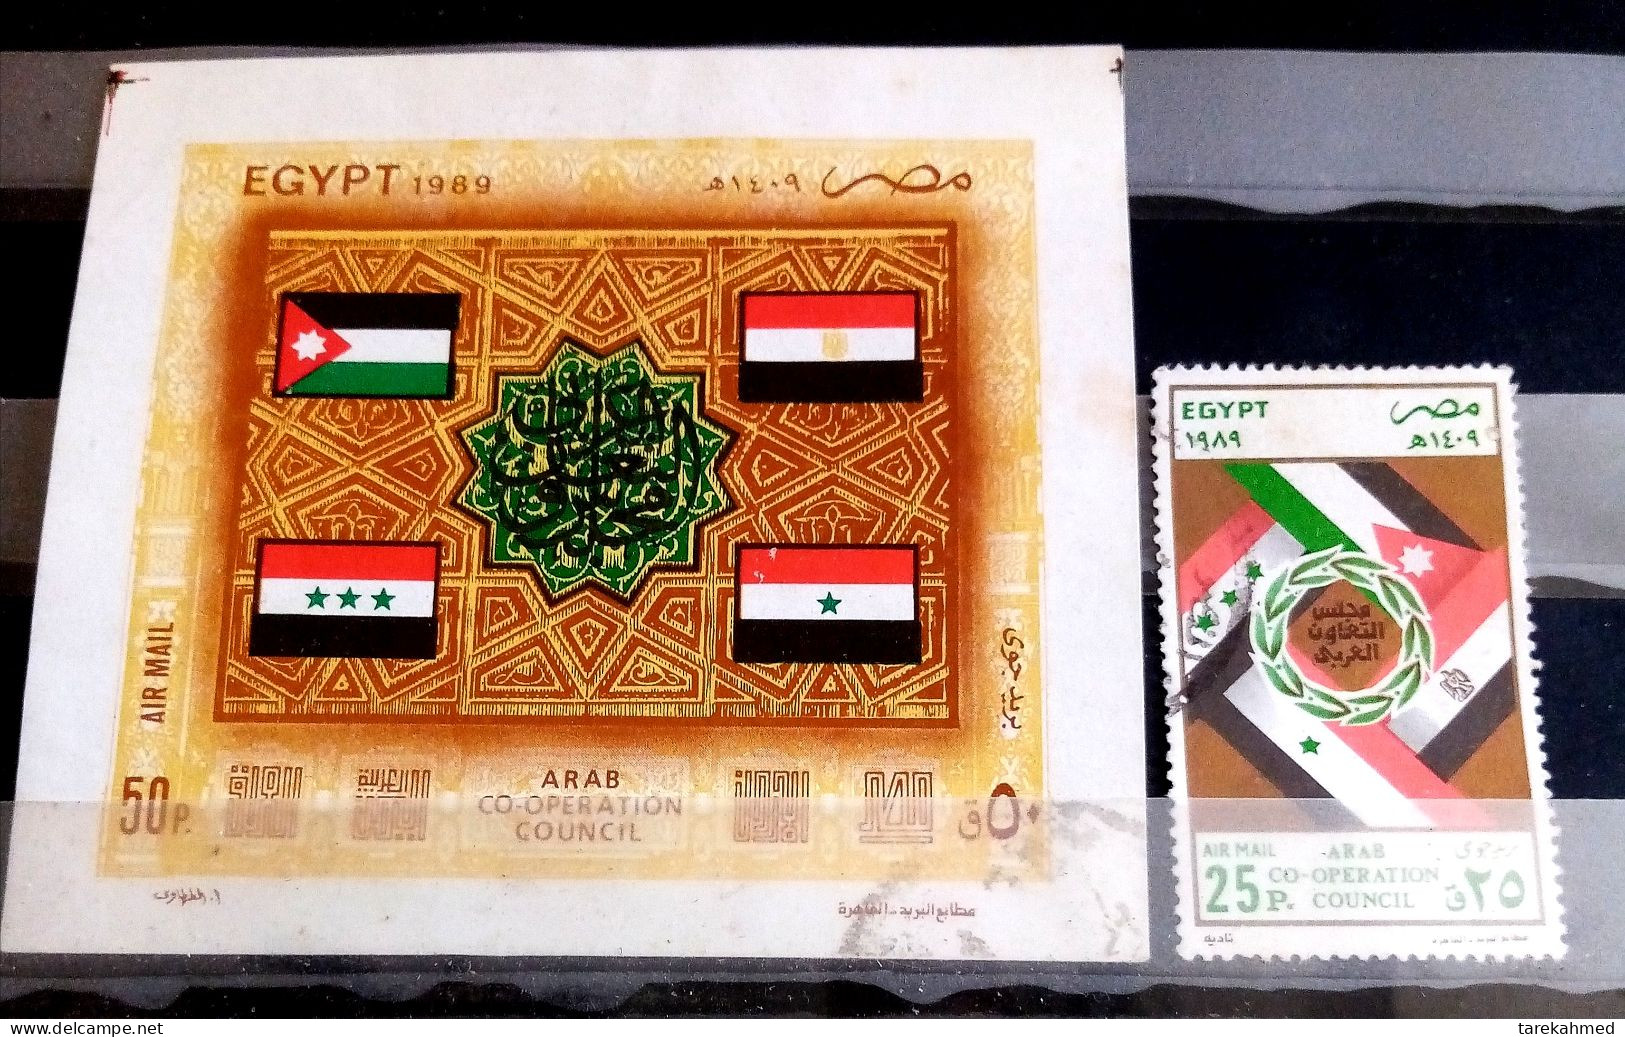 EGYPT 1989 , Complete SET, Stamp And S/S Of The ARAB CO-OPERATION COUNCIL, Flags, Airmail, MNH. - Unused Stamps